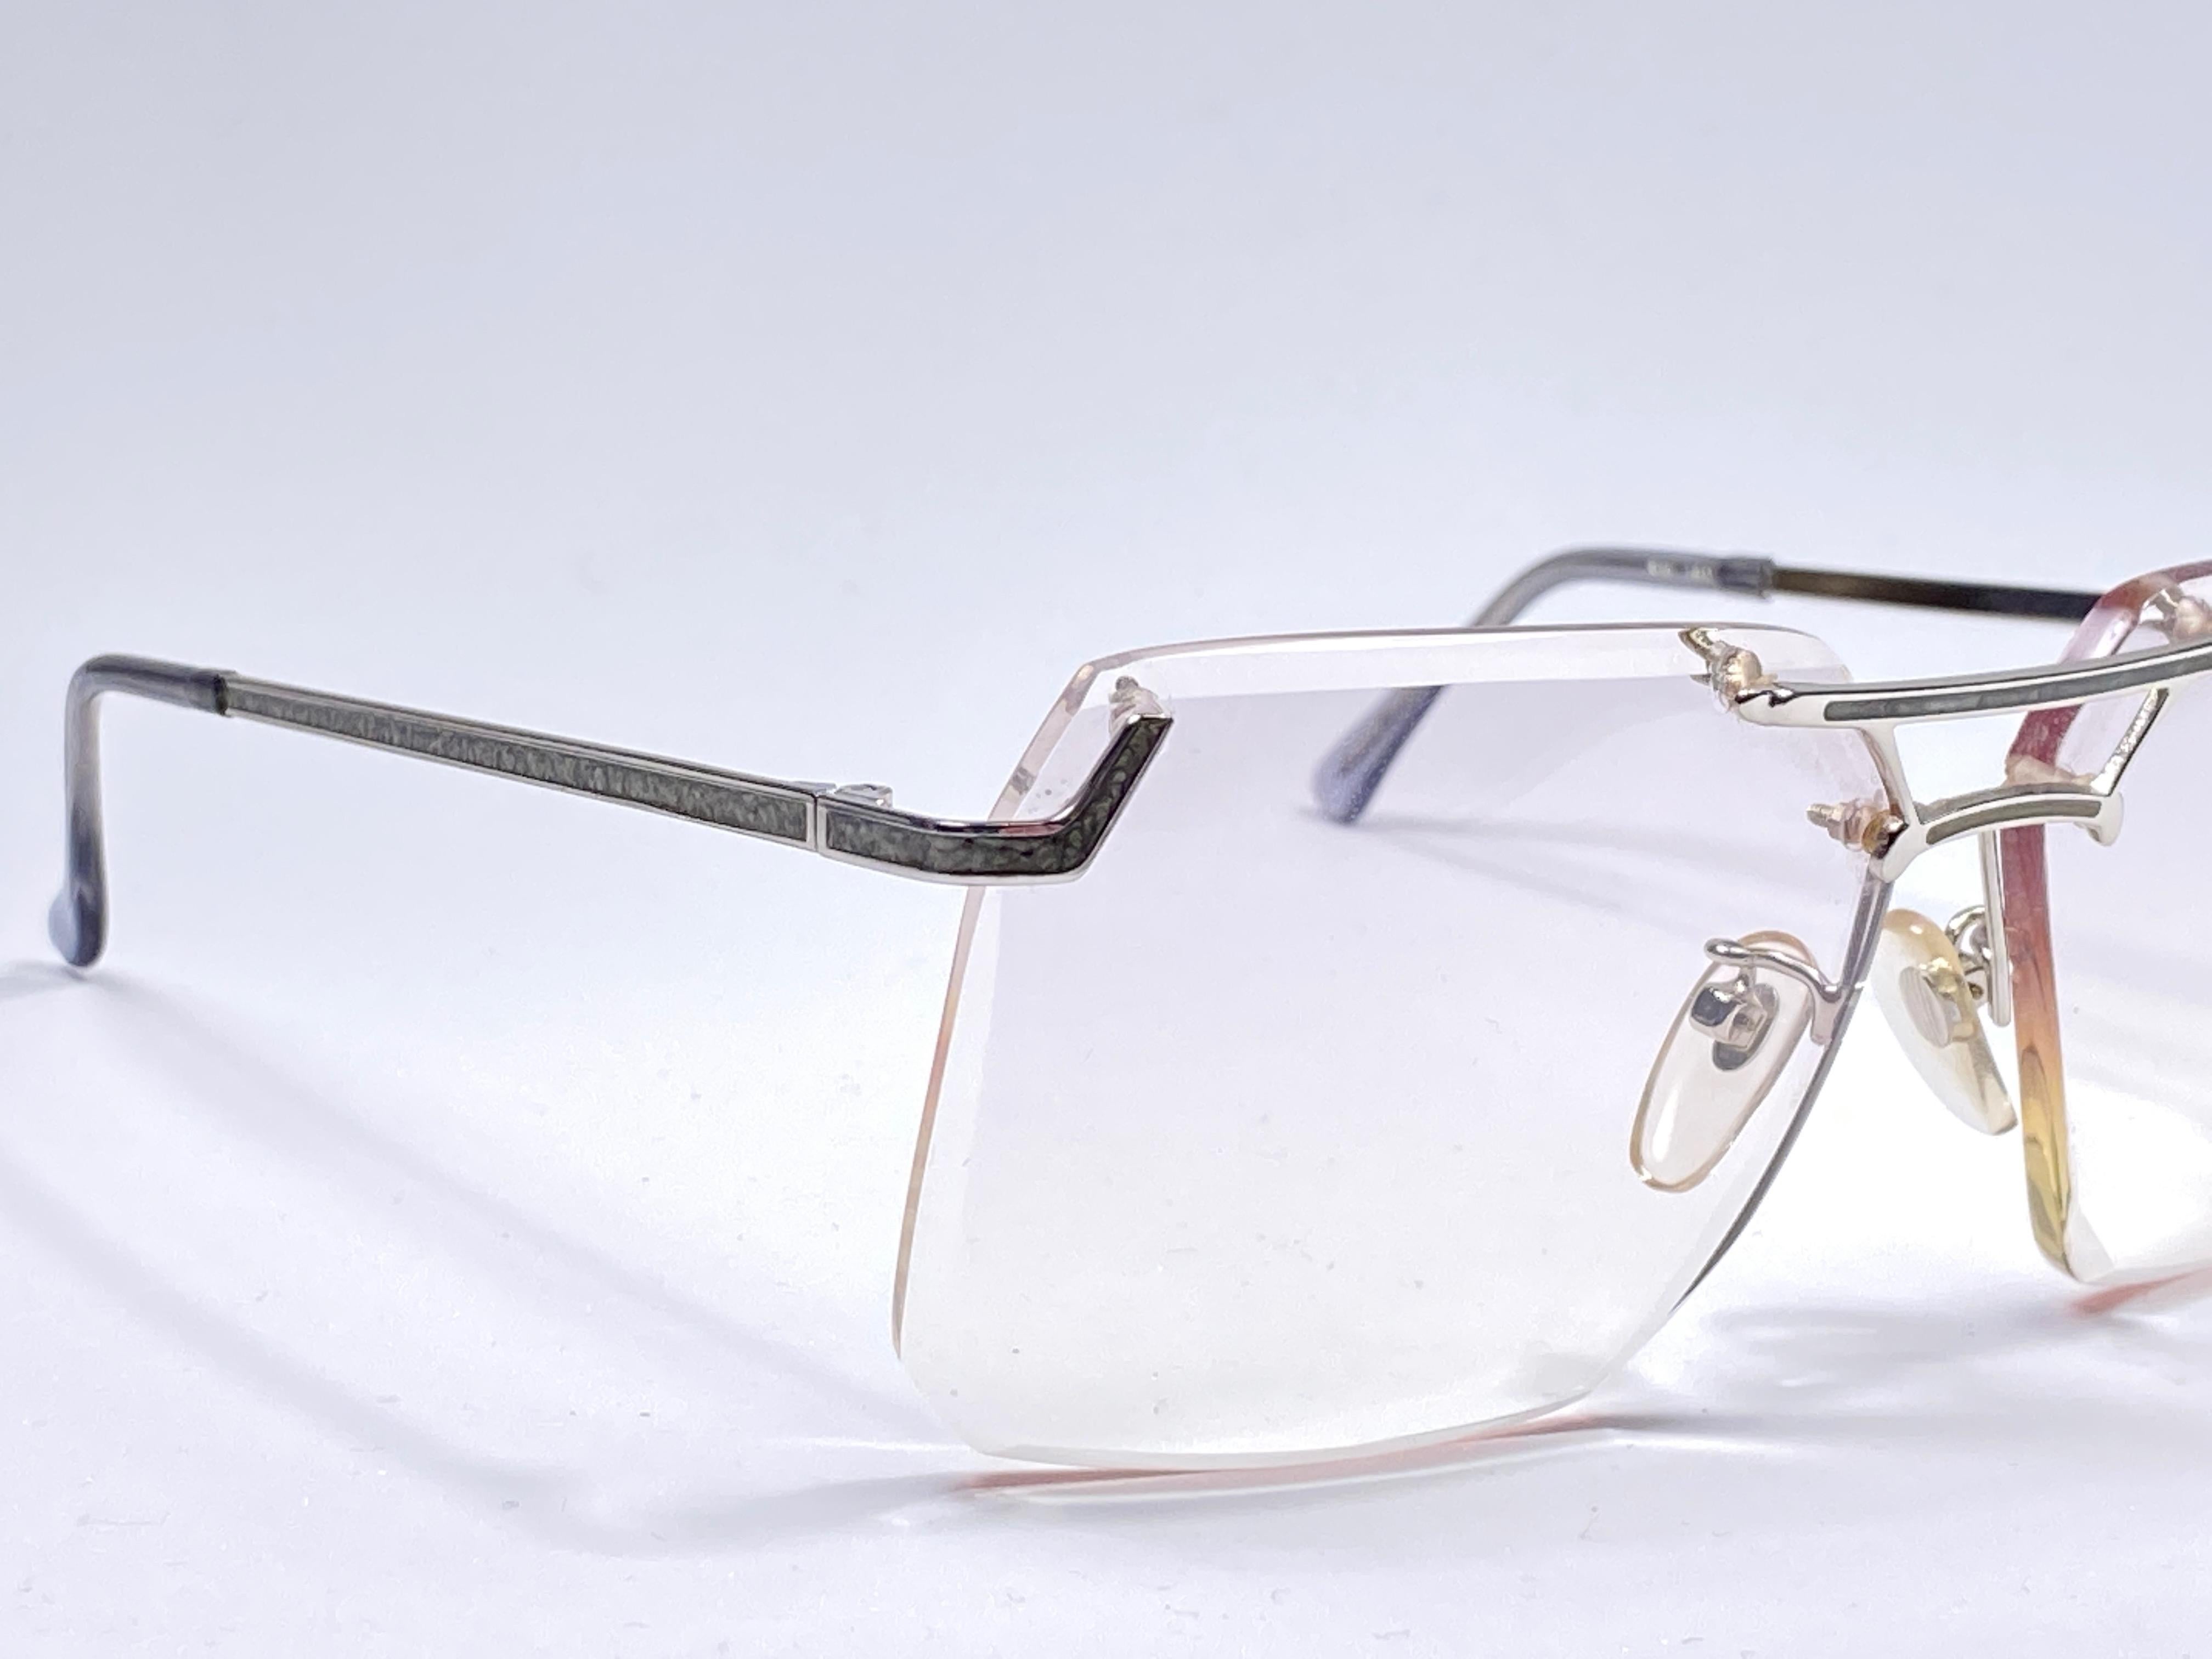 Ultra Tura oversized sunglasses circa 1970's by Tura. Silver rimless frame to adapt your prescription lenses.

This is a seldom and rare piece not only for its aesthetic value but for its importance in the sunglasses and fashion history.   

Please